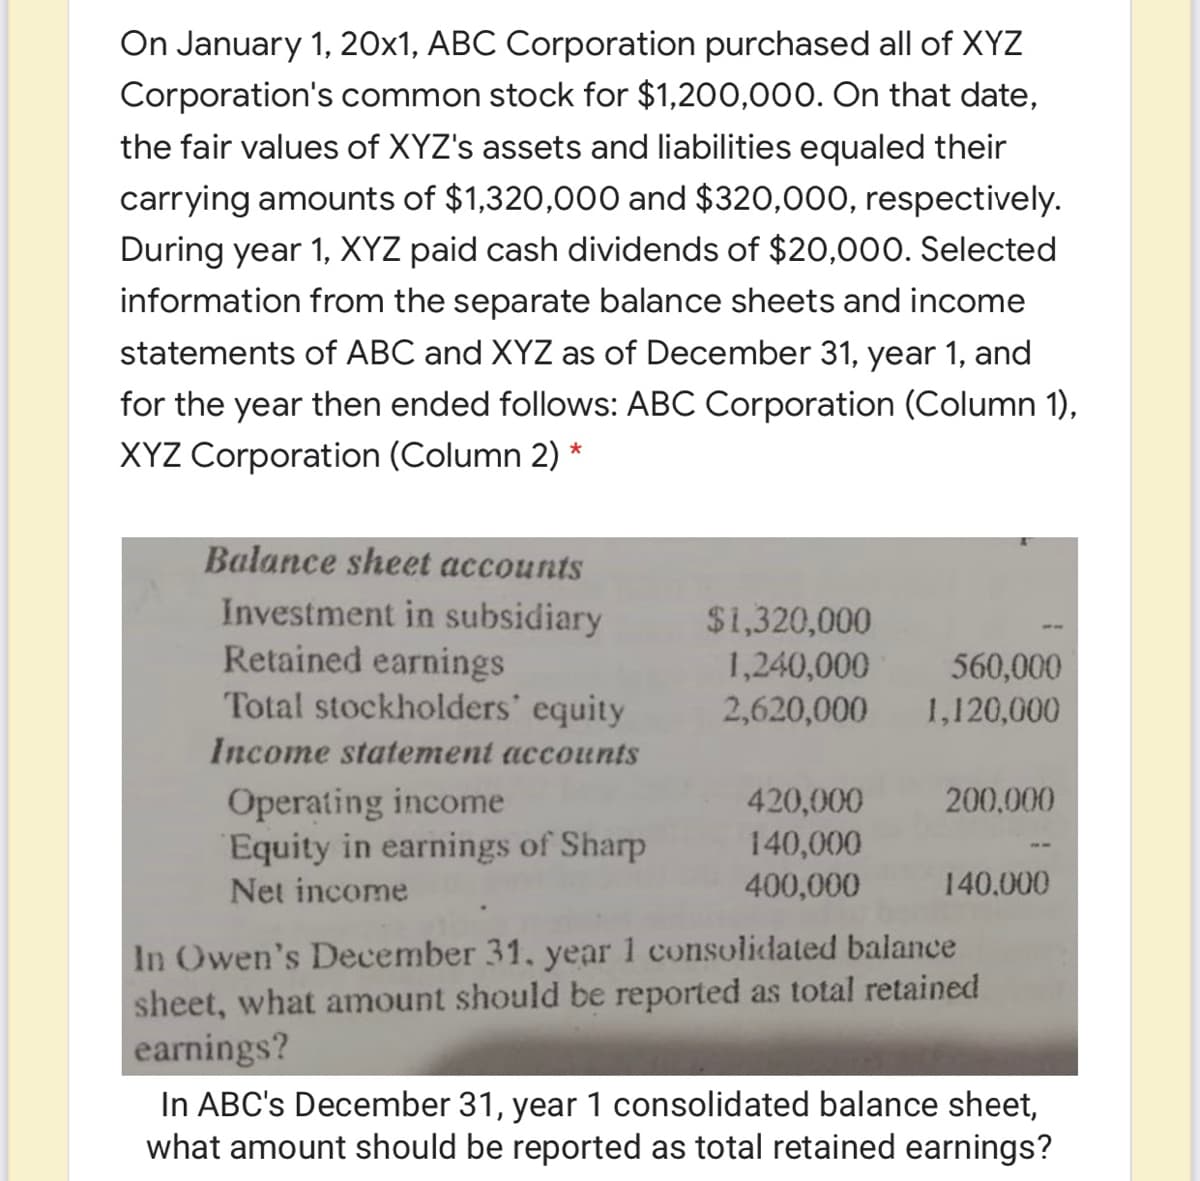 On January 1, 20x1, ABC Corporation purchased all of XYZ
Corporation's common stock for $1,200,000. On that date,
the fair values of XYZ's assets and liabilities equaled their
carrying amounts of $1,320,000 and $320,000, respectively.
During year 1, XYZ paid cash dividends of $20,000. Selected
information from the separate balance sheets and income
statements of ABC and XYZ as of December 31, year 1, and
for the year then ended follows: ABC Corporation (Column 1),
XYZ Corporation (Column 2) *
Balance sheet accounts
Investment in subsidiary
Retained earnings
Total stockholders' equity
$1,320,000
1,240,000
2,620,000
560,000
1,120,000
Income statement accounts
Operating income
Equity in earnings of Sharp
200,000
420,000
140,000
400,000
Net income
140.000
In Owen's December 31, year 1 consolidated balance
sheet, what amount should be reported as total retained
earnings?
In ABC's December 31, year 1 consolidated balance sheet,
what amount should be reported as total retained earnings?
